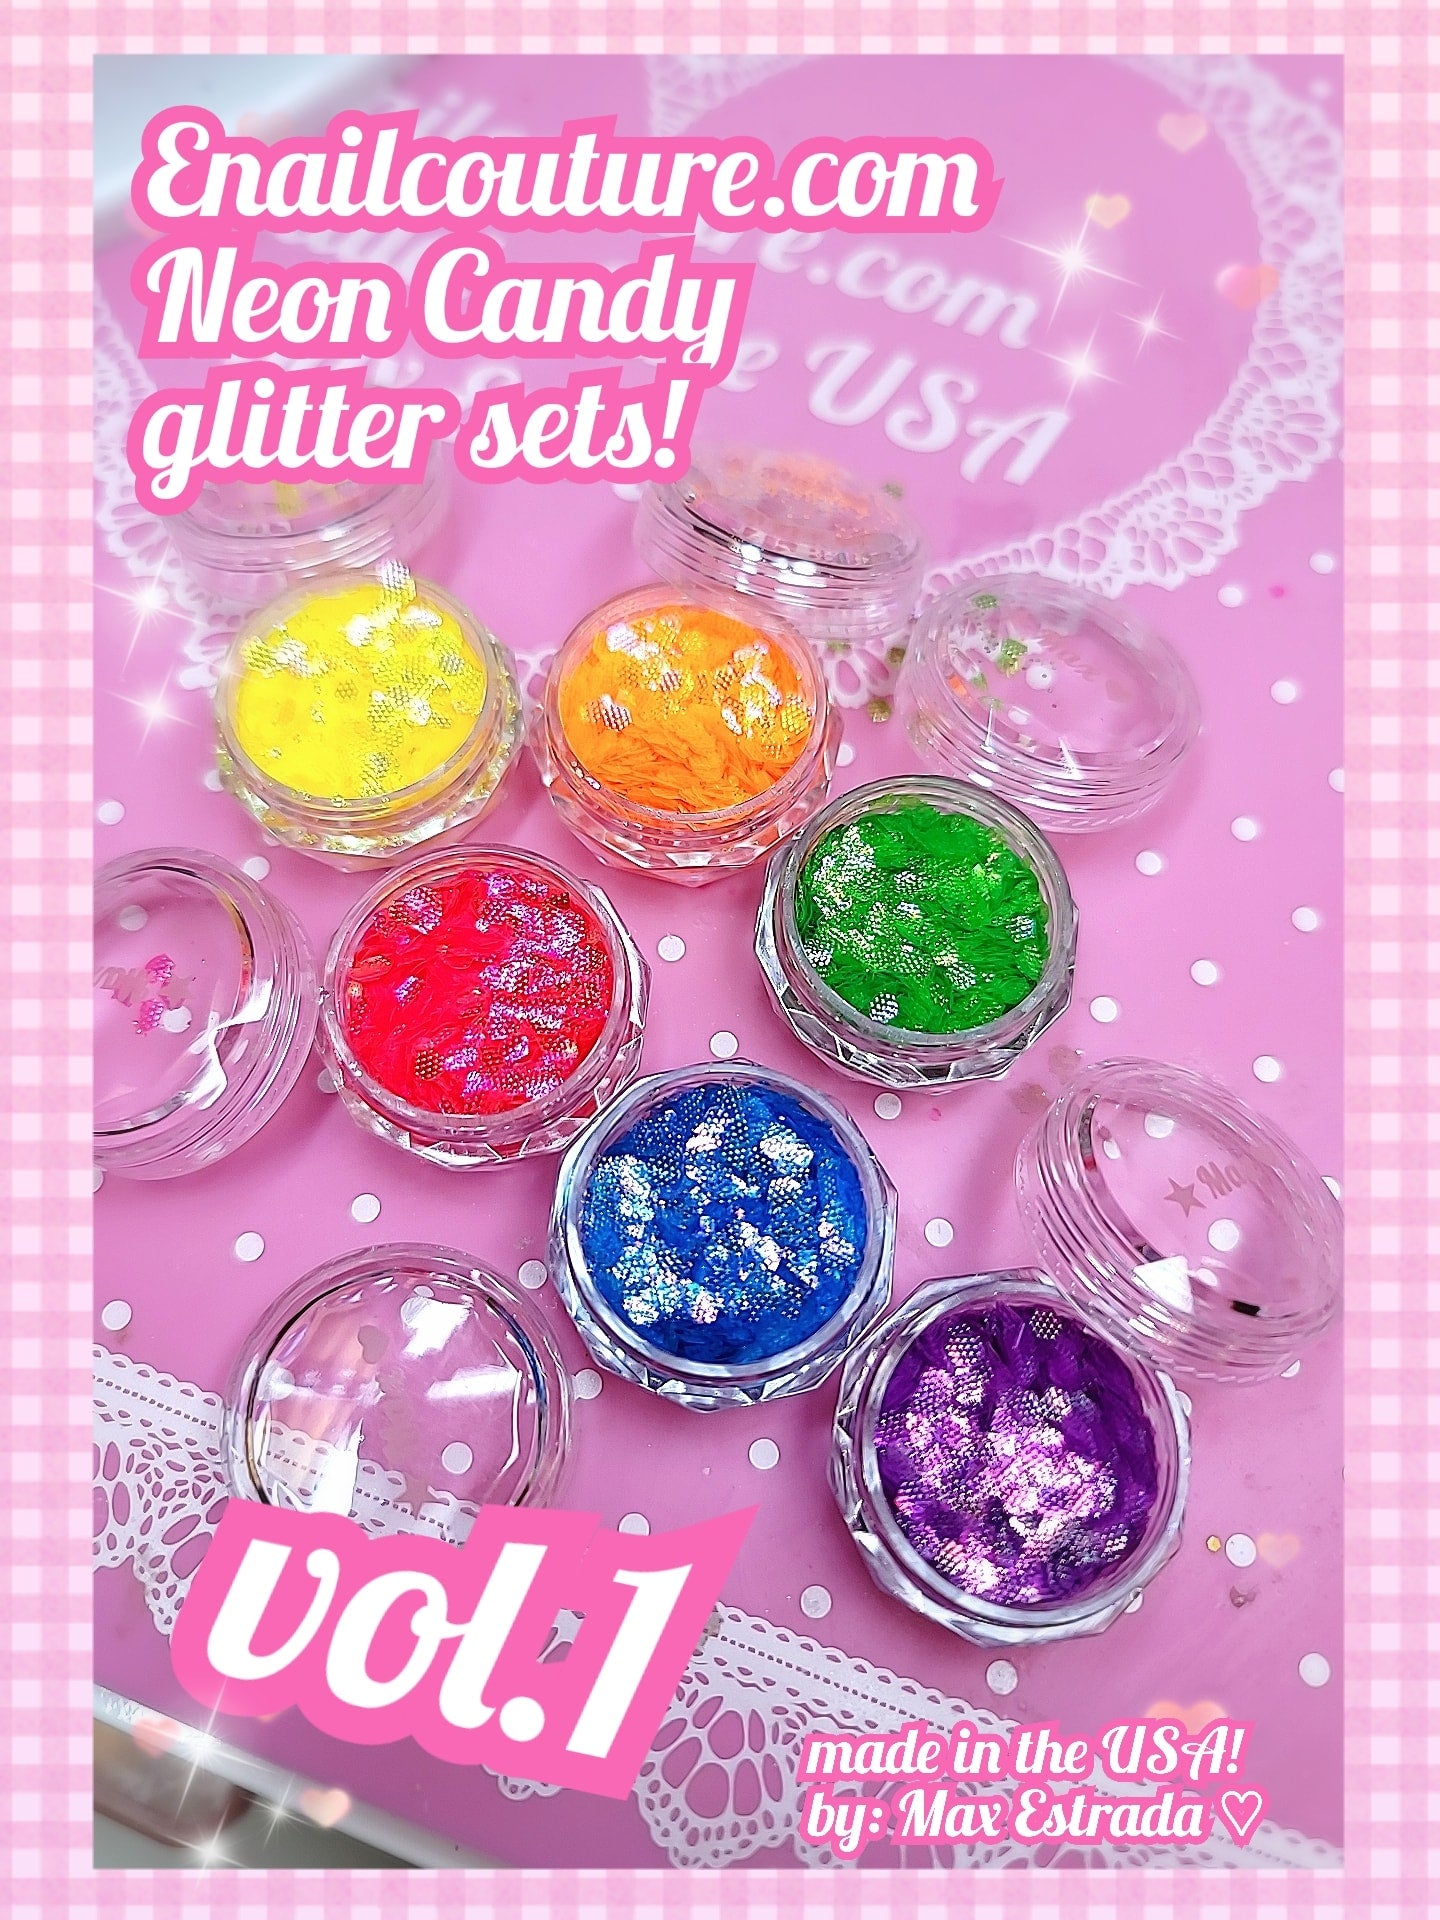 Neon Candy vol.1  Glitter Set (Set of 6 Holographic Nail Glitter Mermaid Powder Flakes Shiny Charms Hexagon Nail Art Pigment Dust Decoration Manicure)